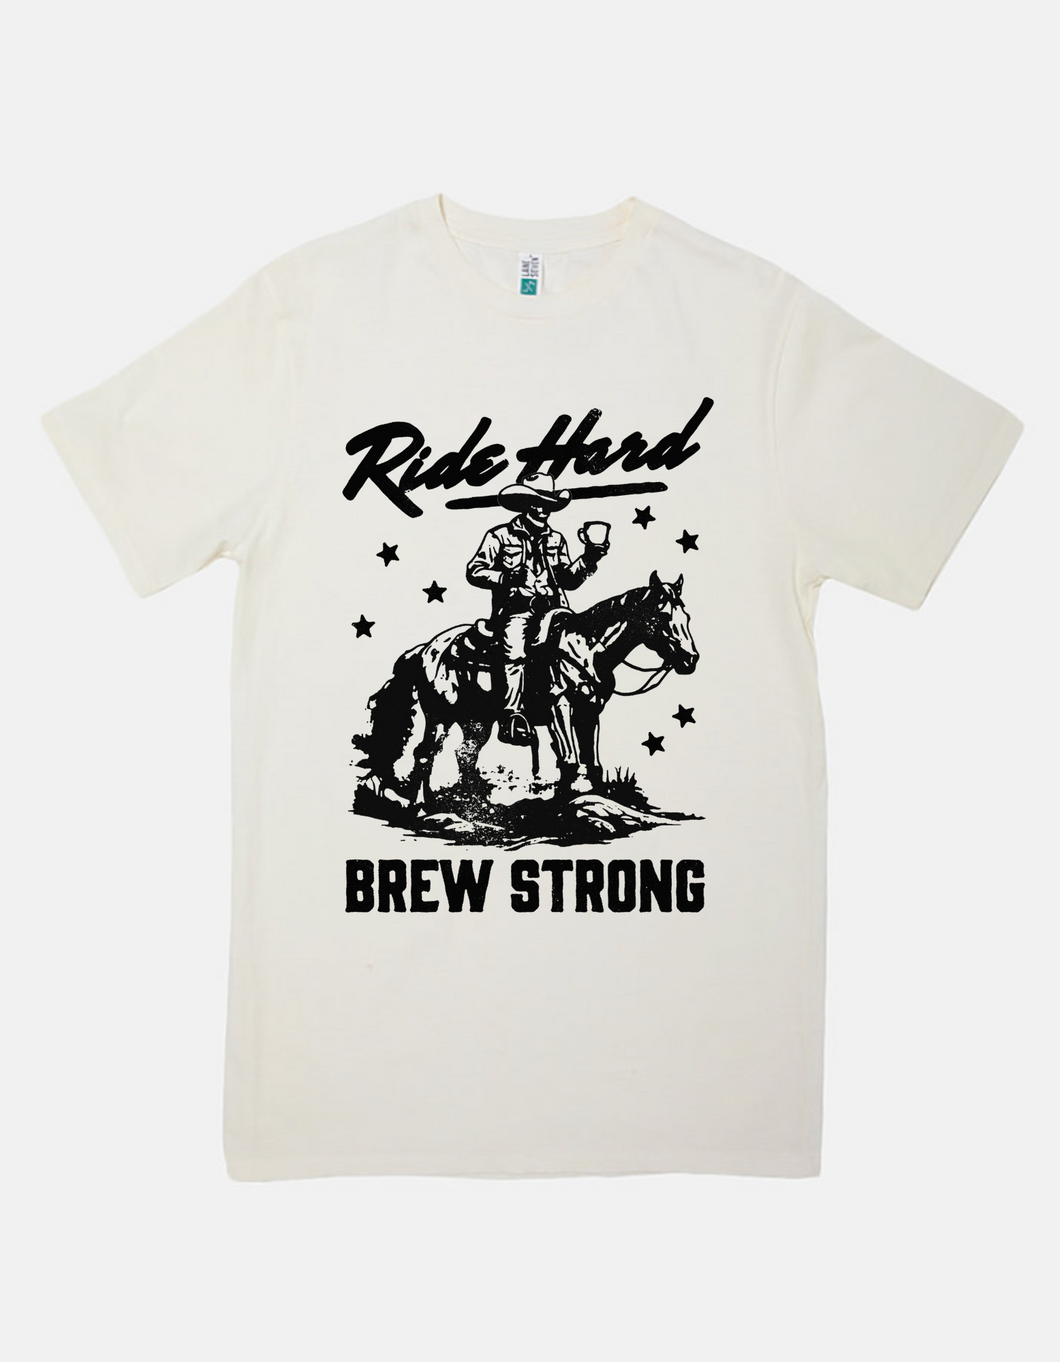 Ride Hard, Brew Strong - Graphic Tee